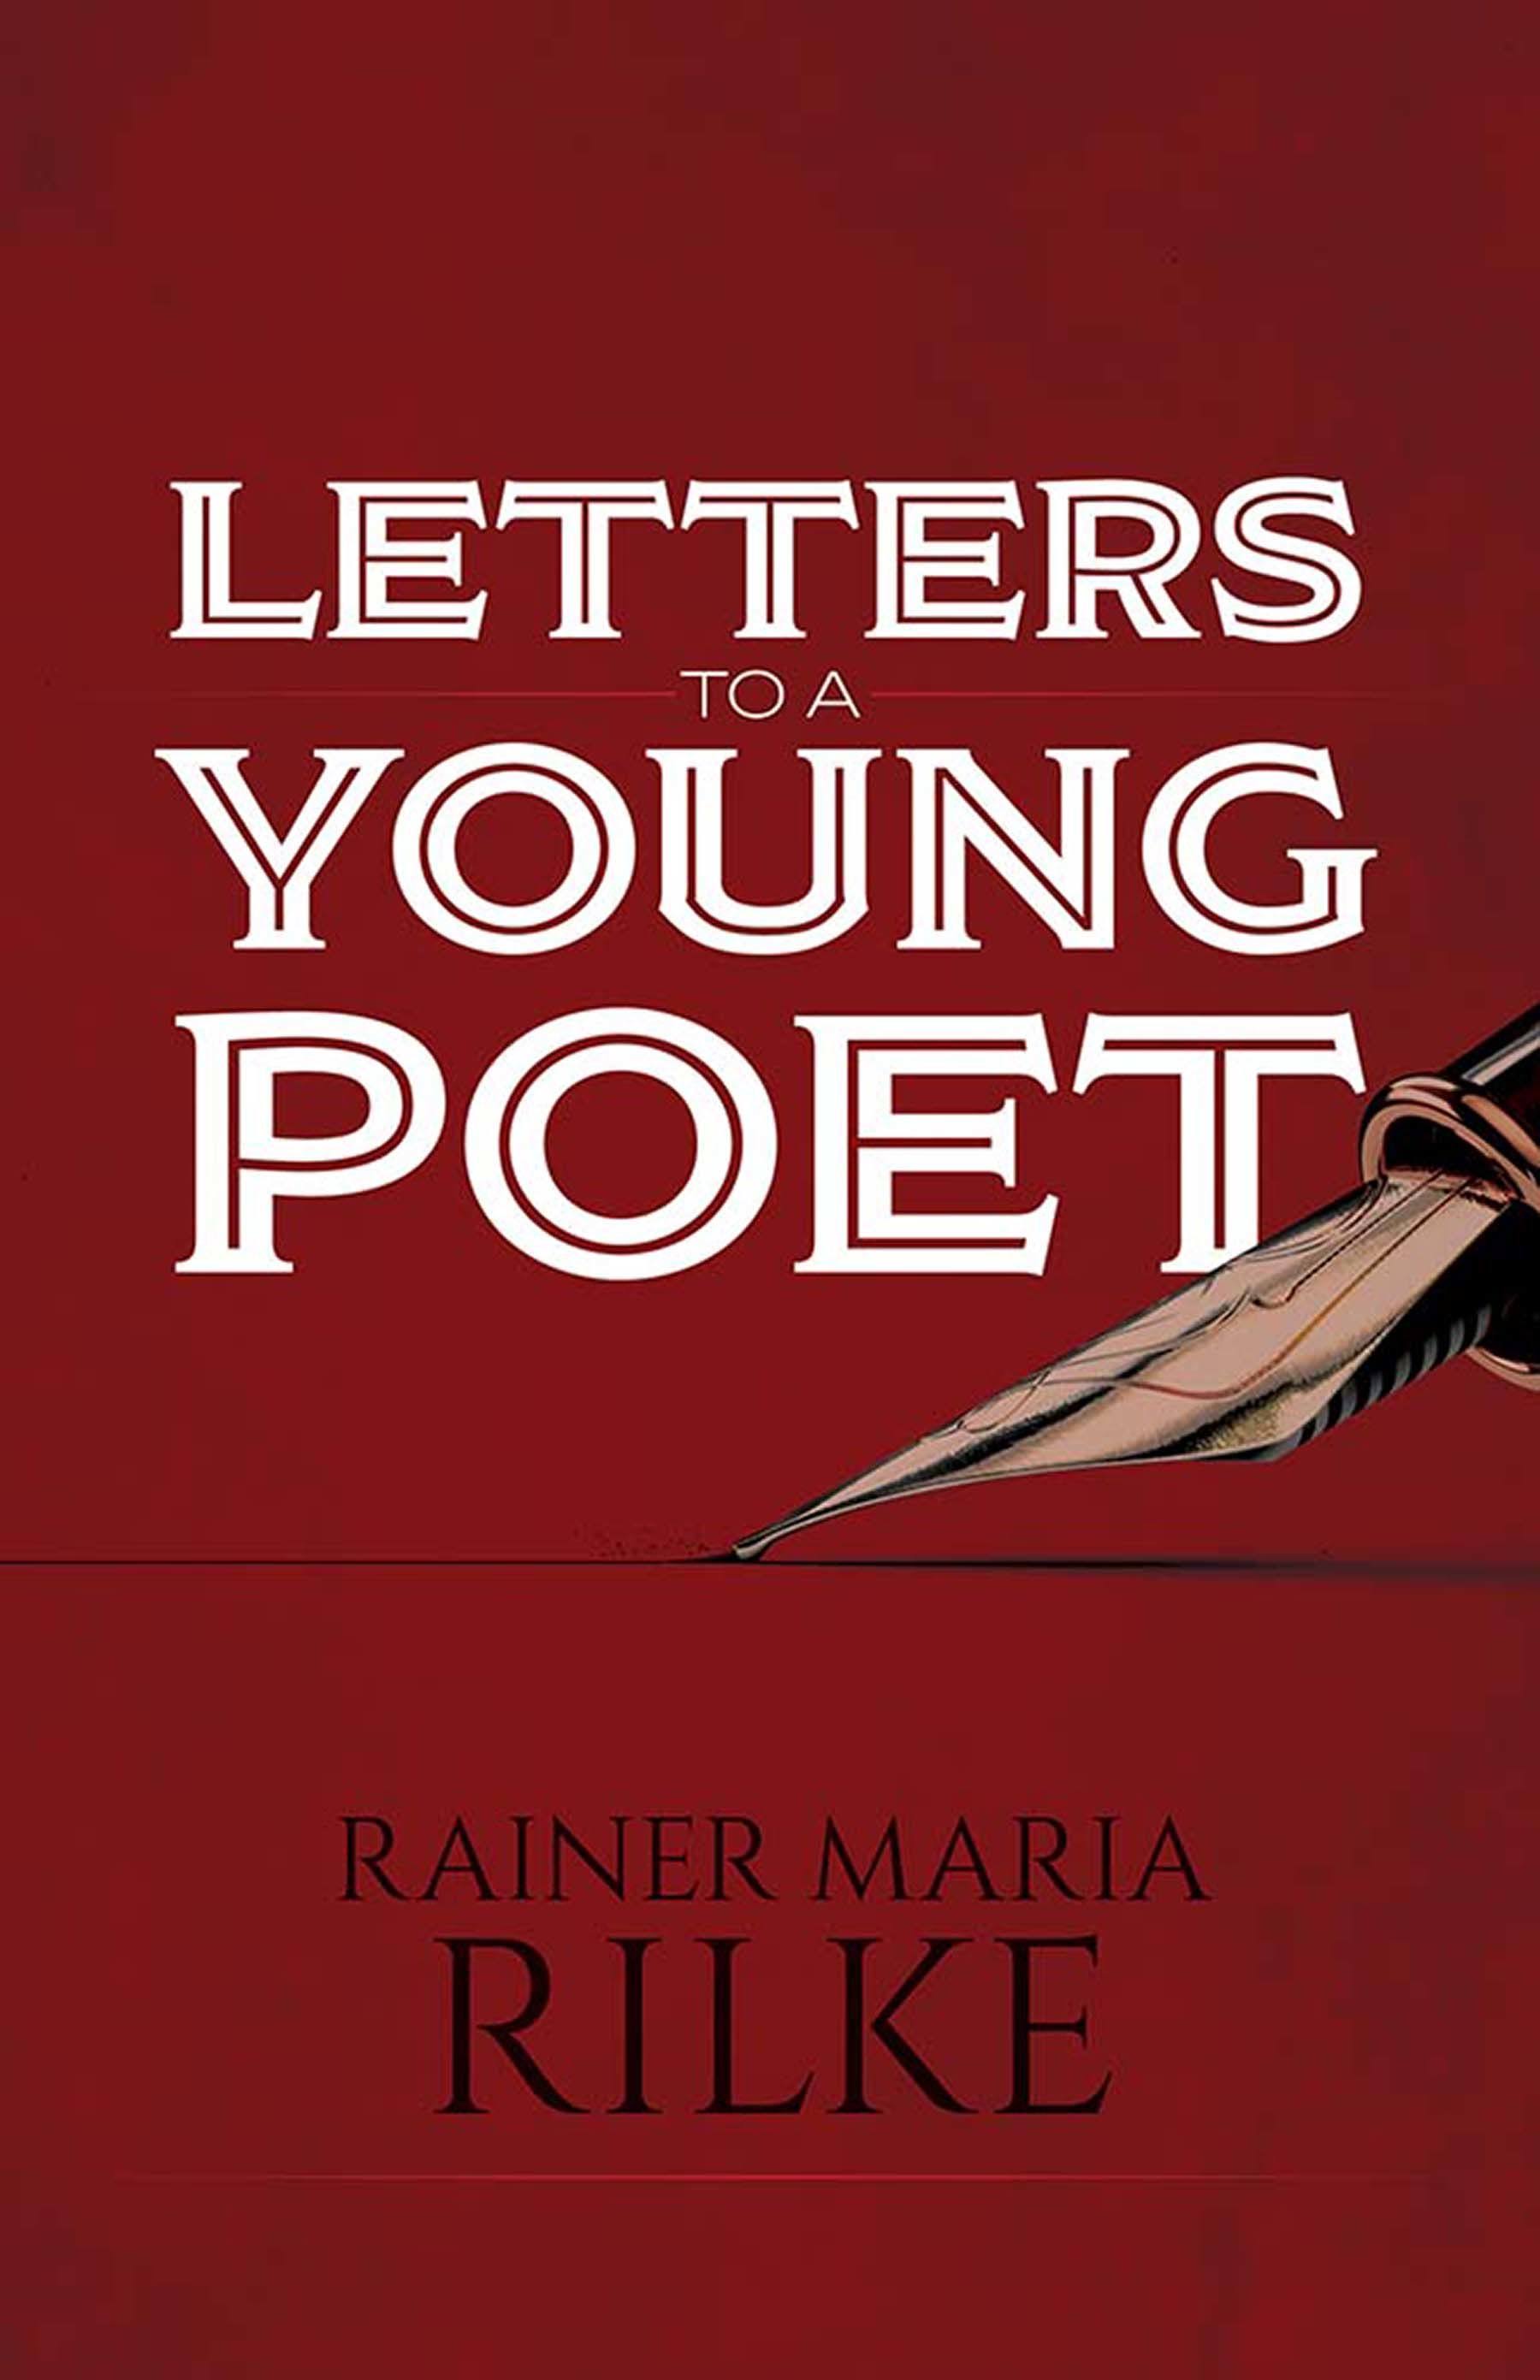 Letters to a Young Poet [Book]